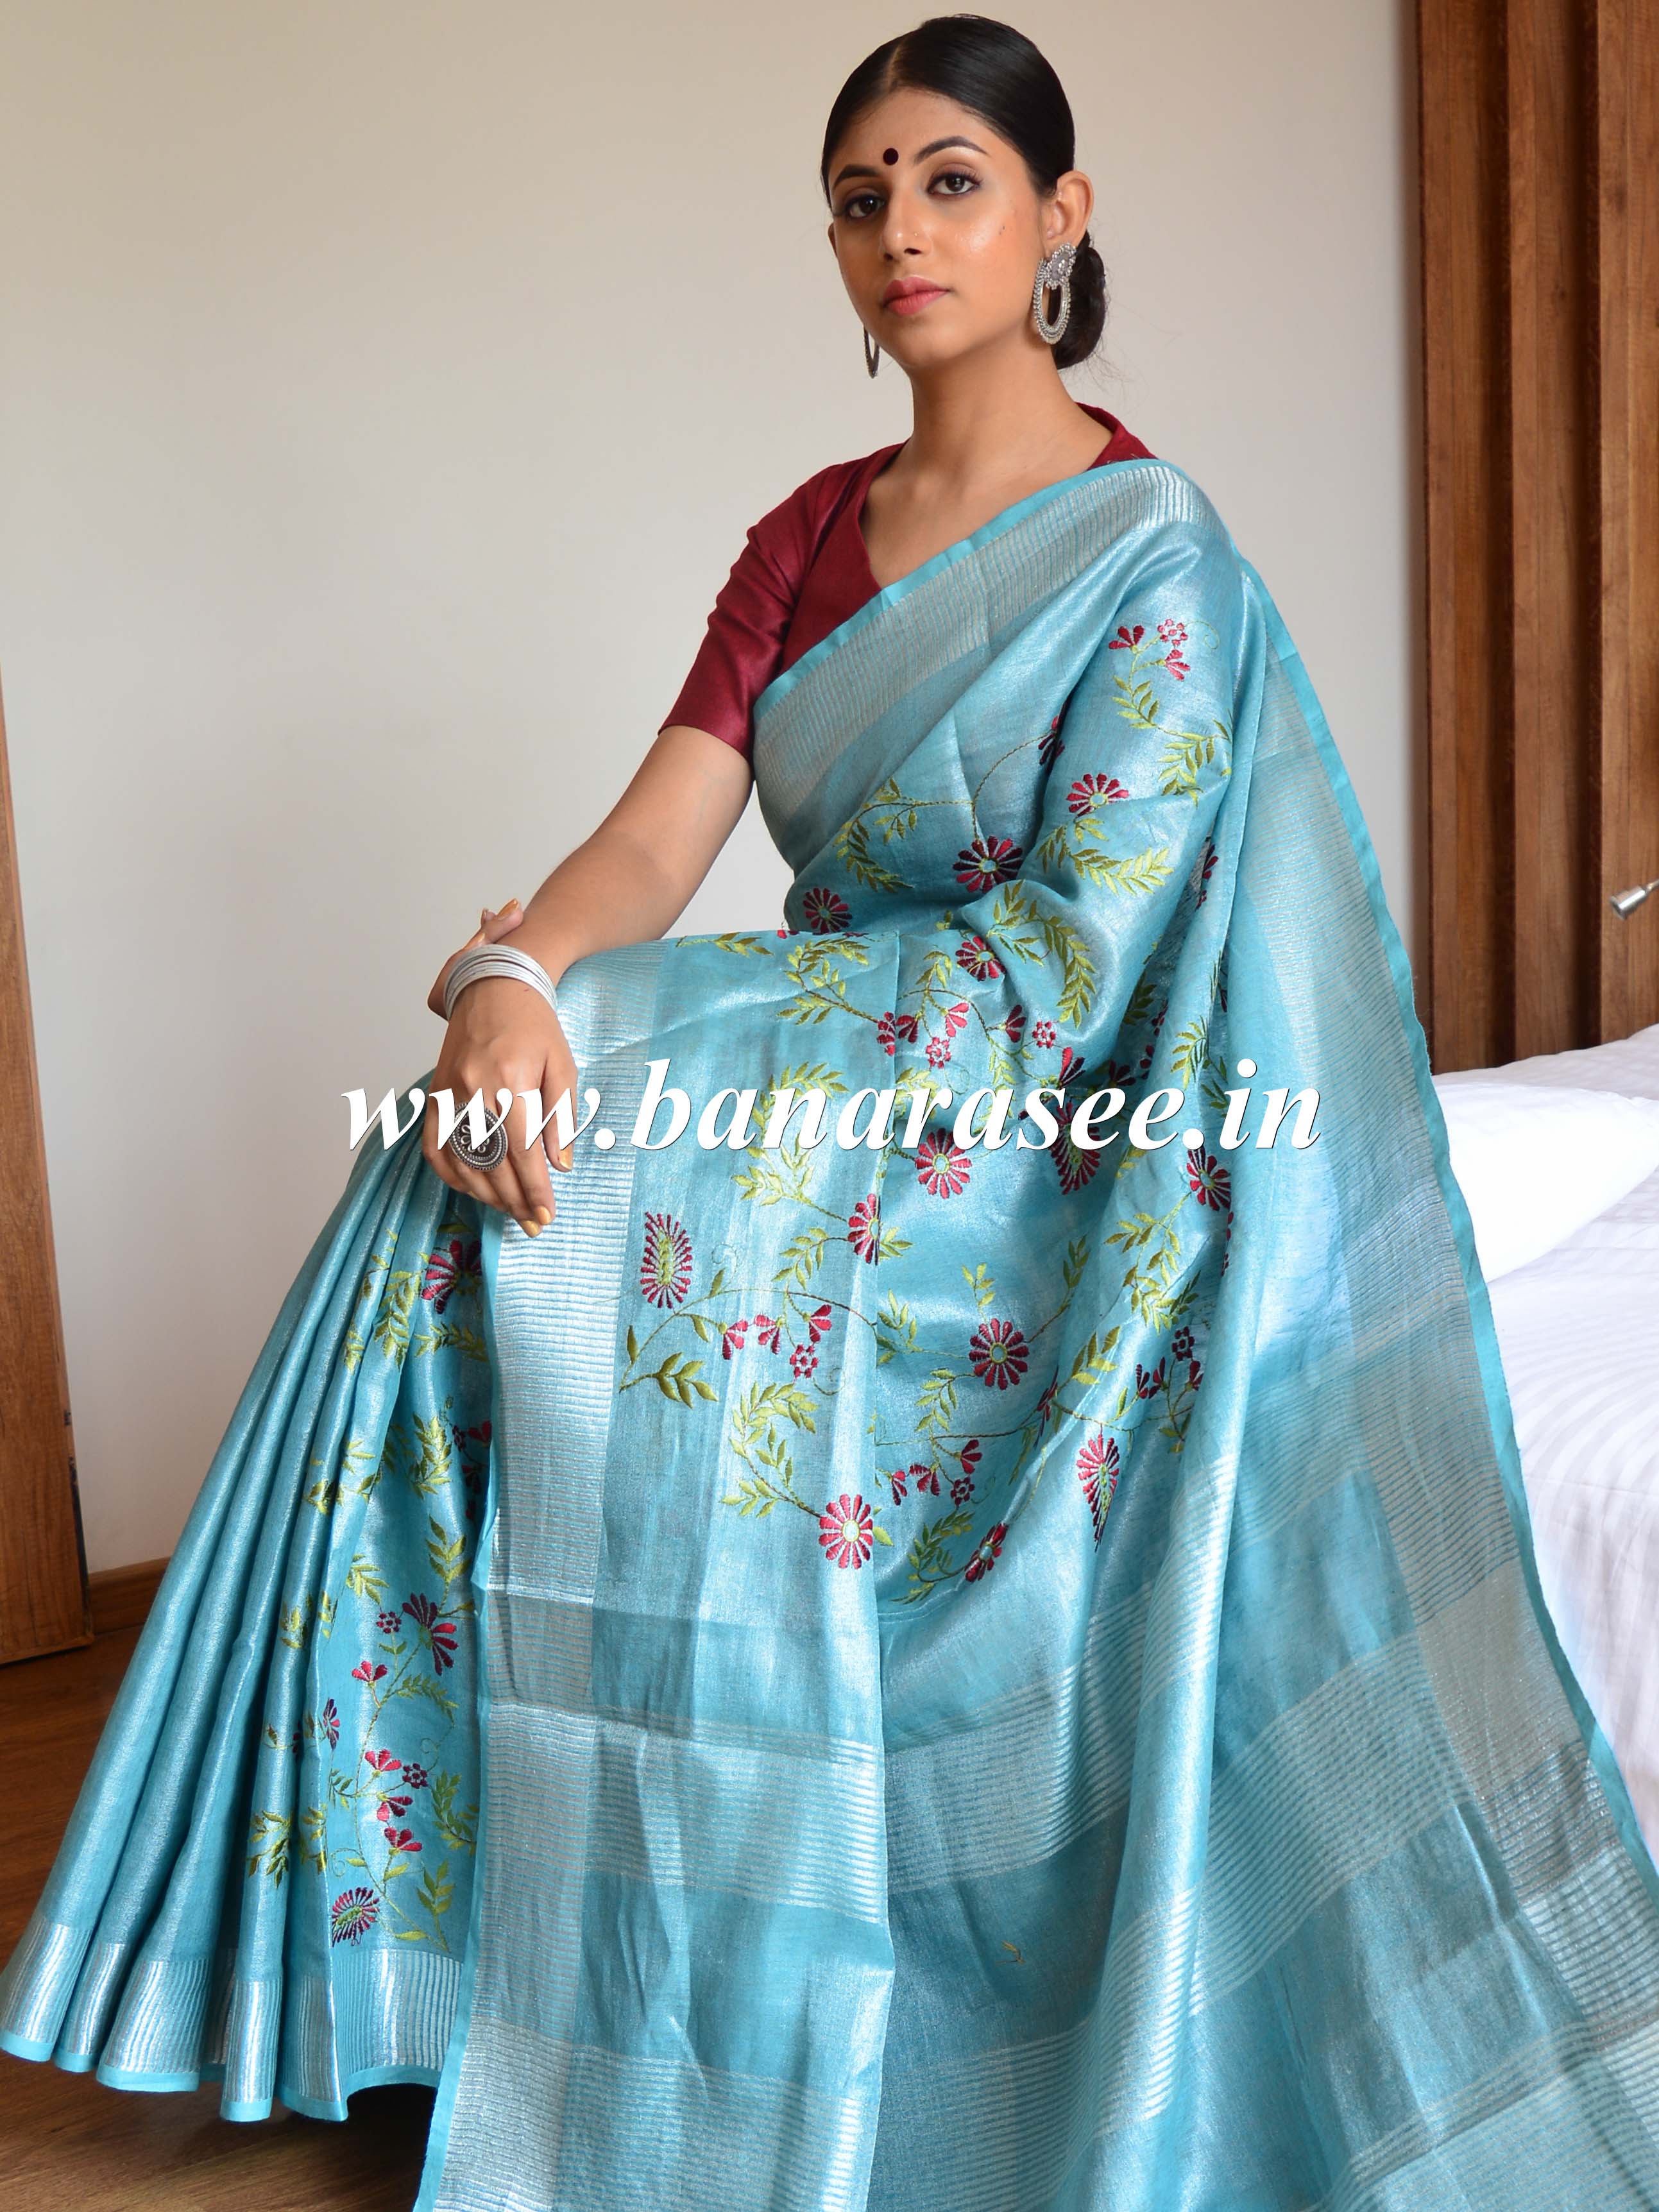 Banarasee Handloom Pure Linen By Tissue Embroidered Saree-Blue